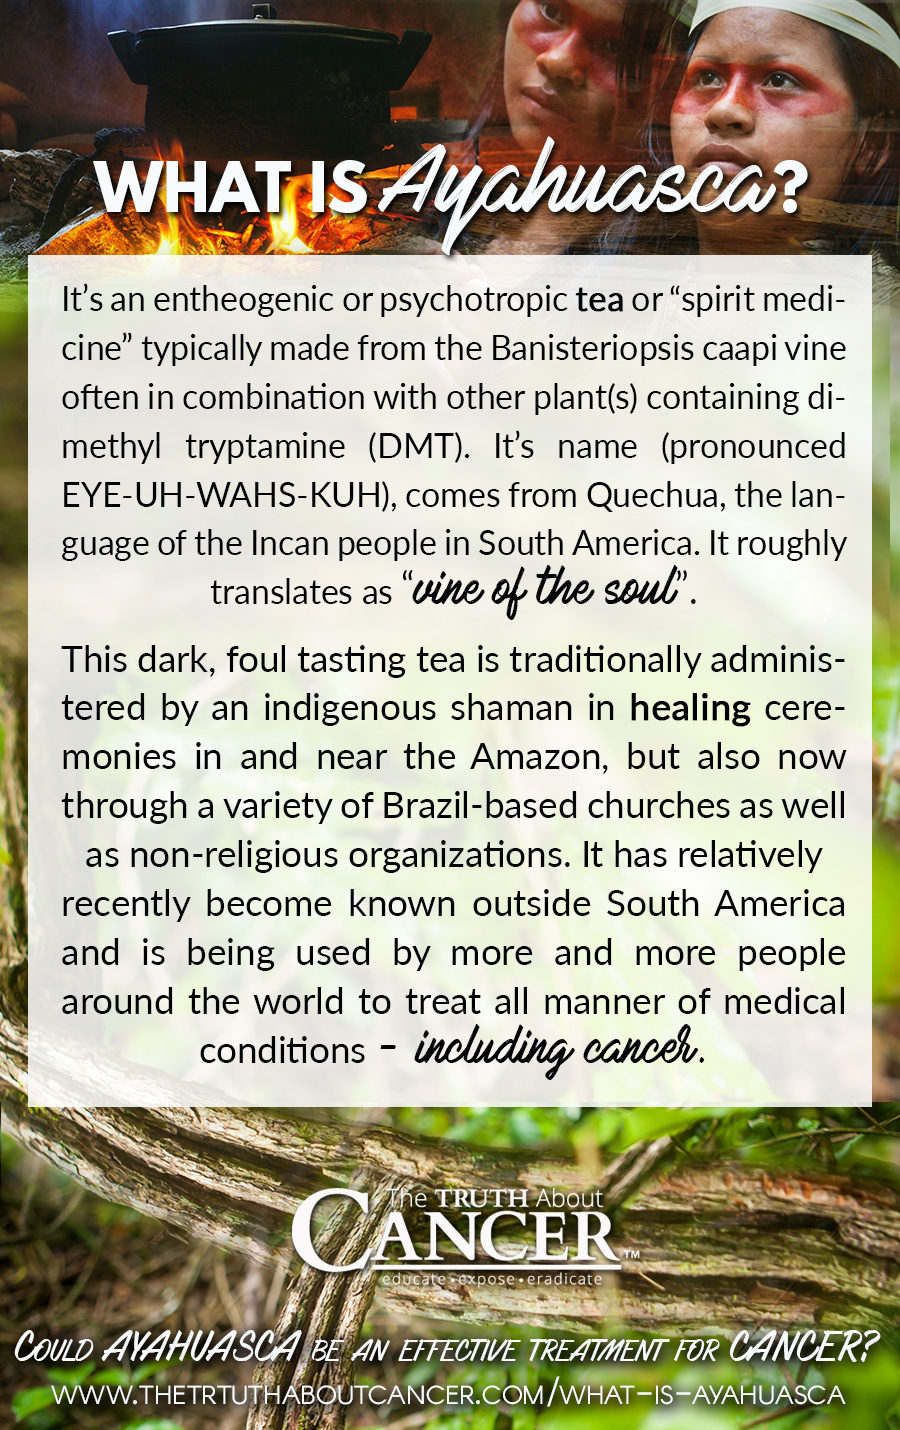 It’s an entheogenic or psychotropic tea or “spirit medicine” typically made from the Banisteriopsis caapi vine often in combination with other plant(s) containing